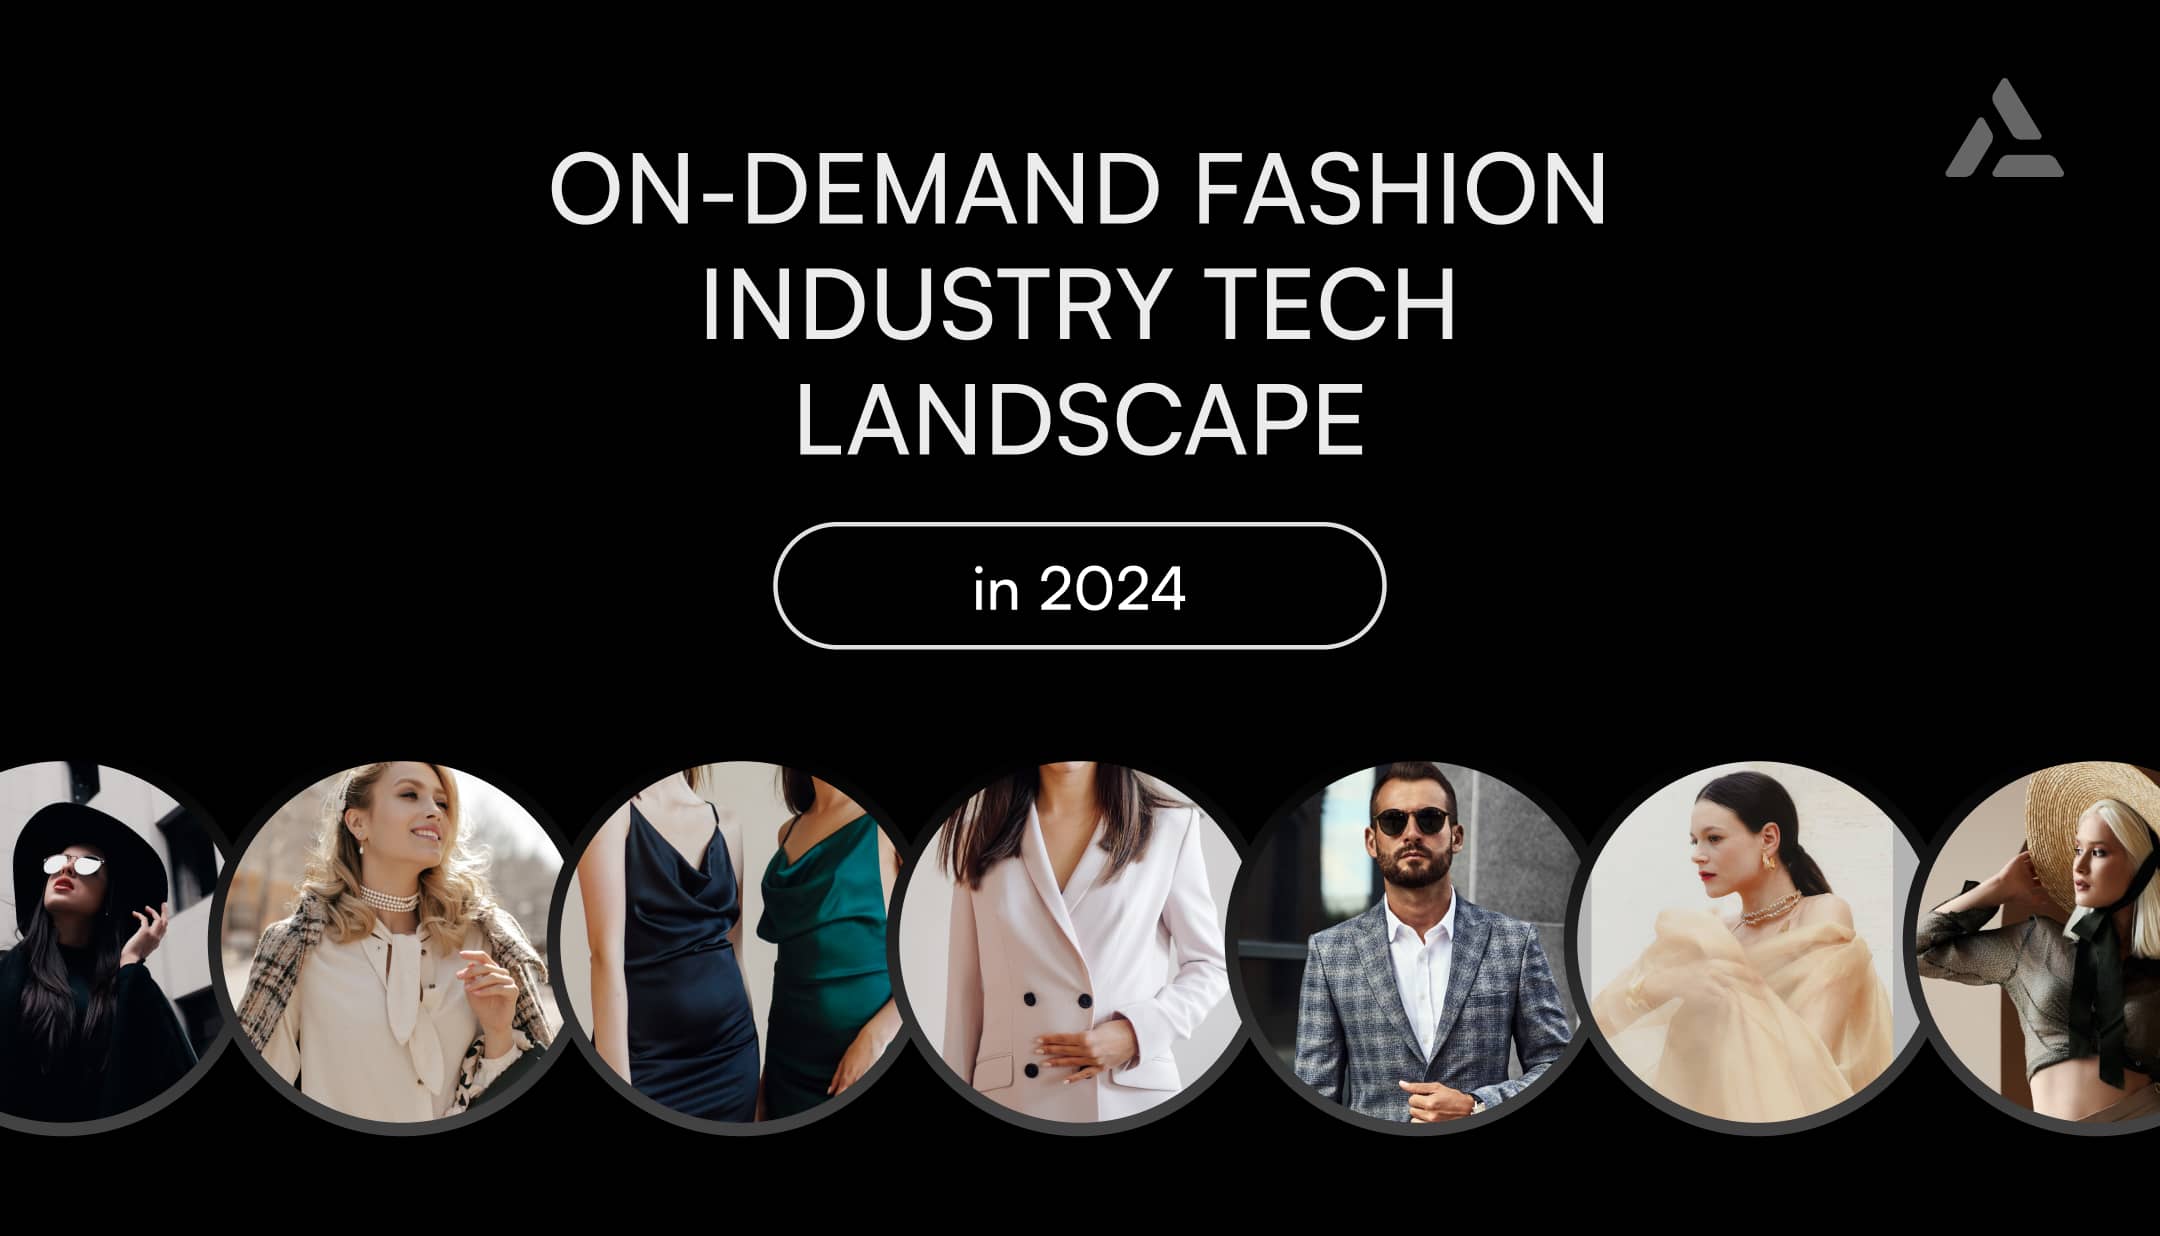 A digital collage titled "Tech Landscape 2024 in the on-demand fashion industry," featuring stylized portraits of diverse fashion models and professionals.